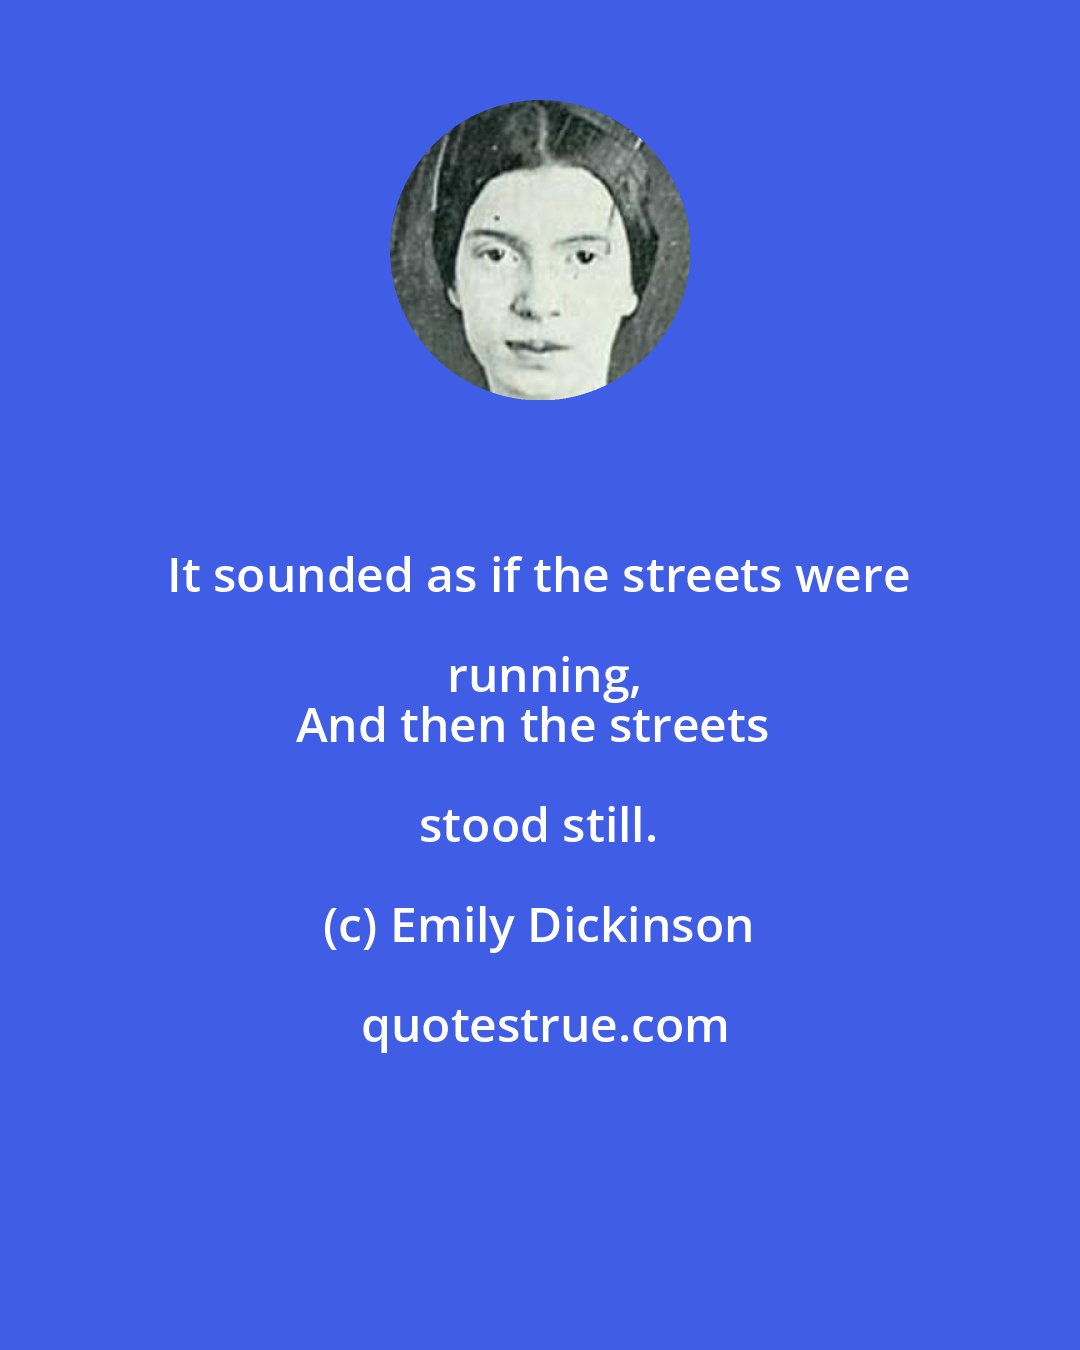 Emily Dickinson: It sounded as if the streets were running,
And then the streets stood still.